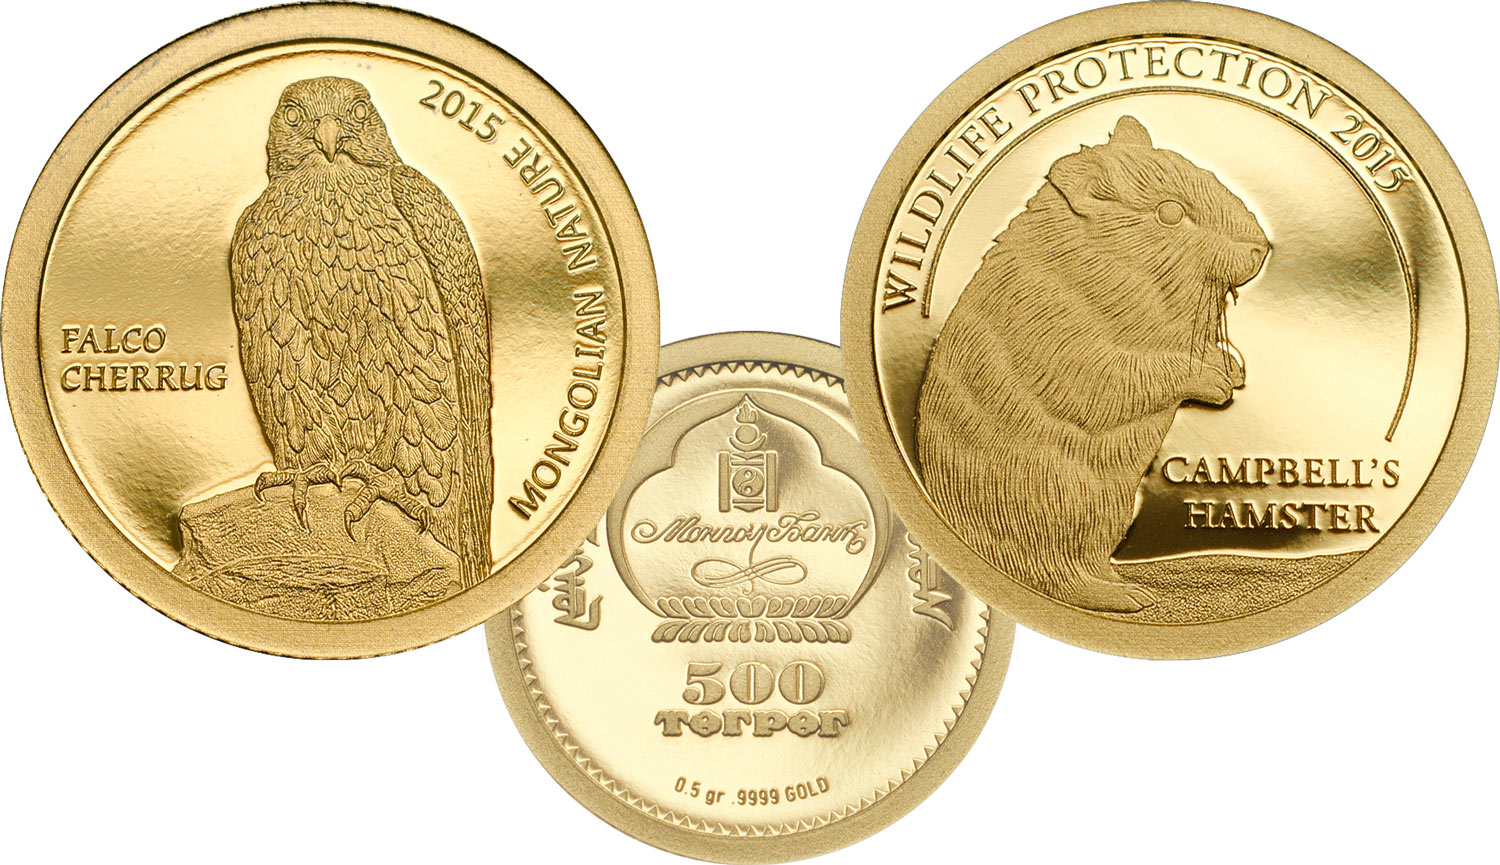 2013 0.5g PROOF Gold 500 Togrog Mongolia Endangered Wildlife WOLF Coin. 